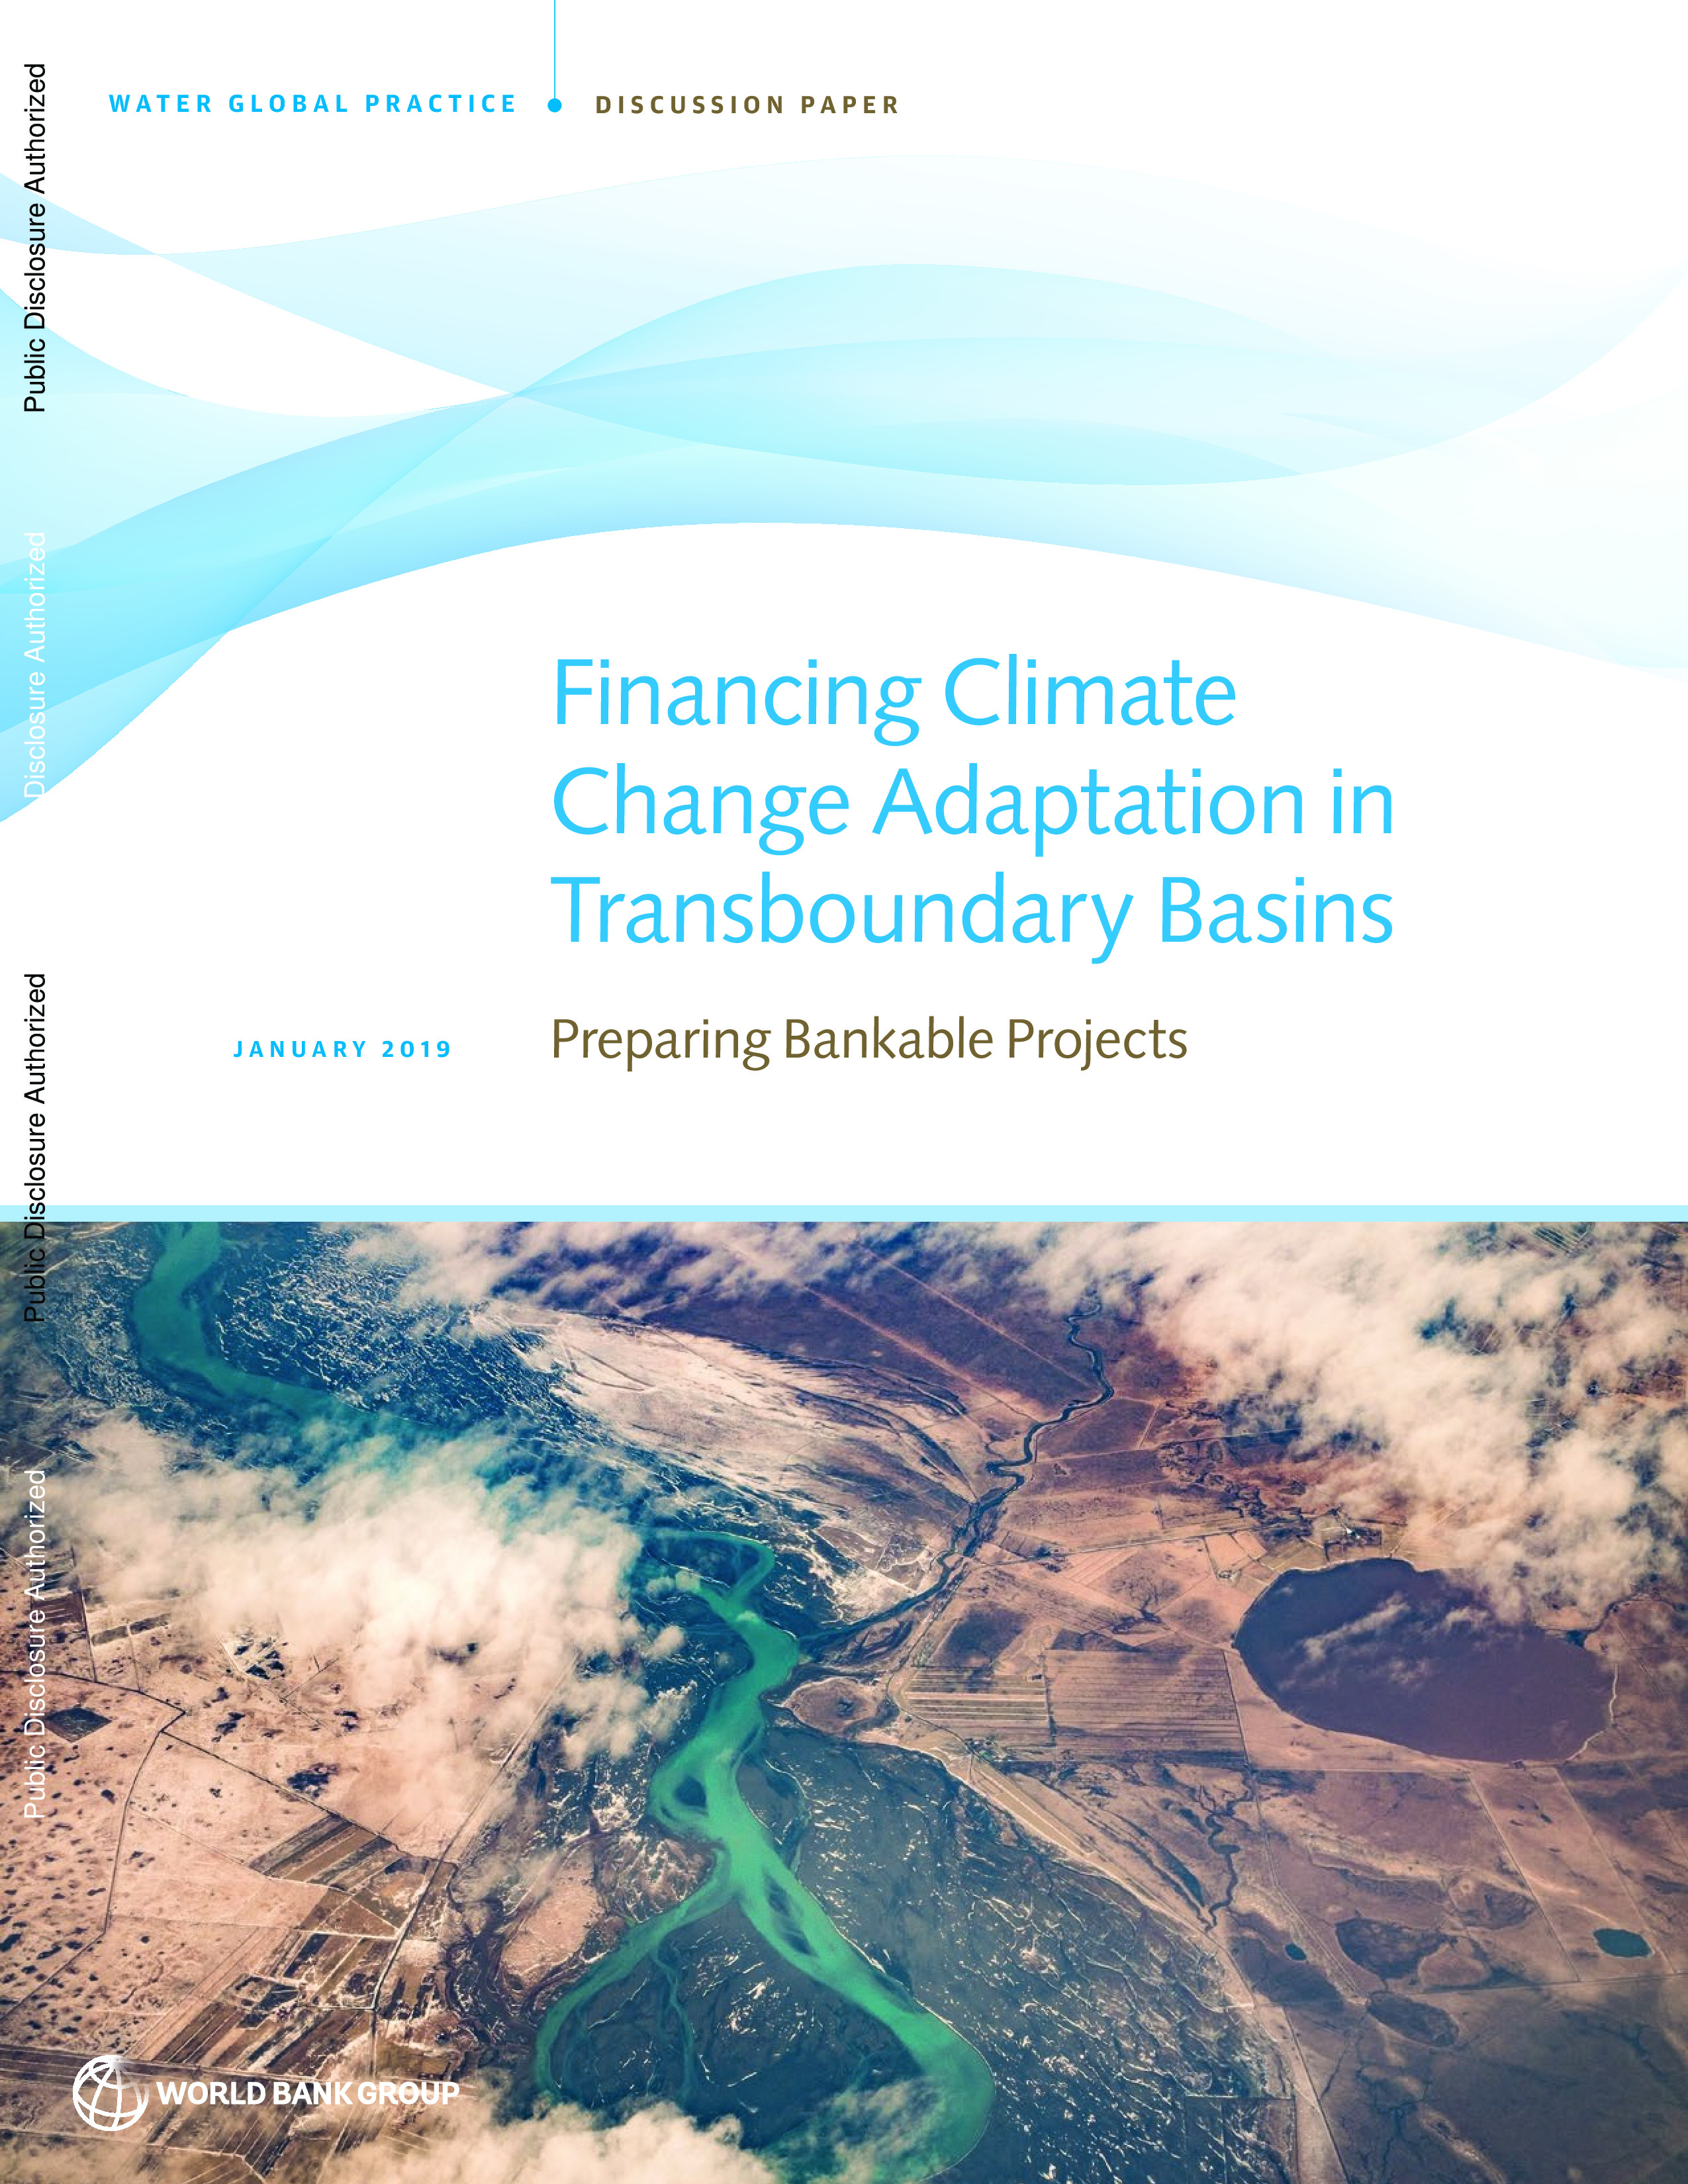 Financing Climate Change Adaptation in Transboundary Basins: Preparing Bankable Projects, 2019